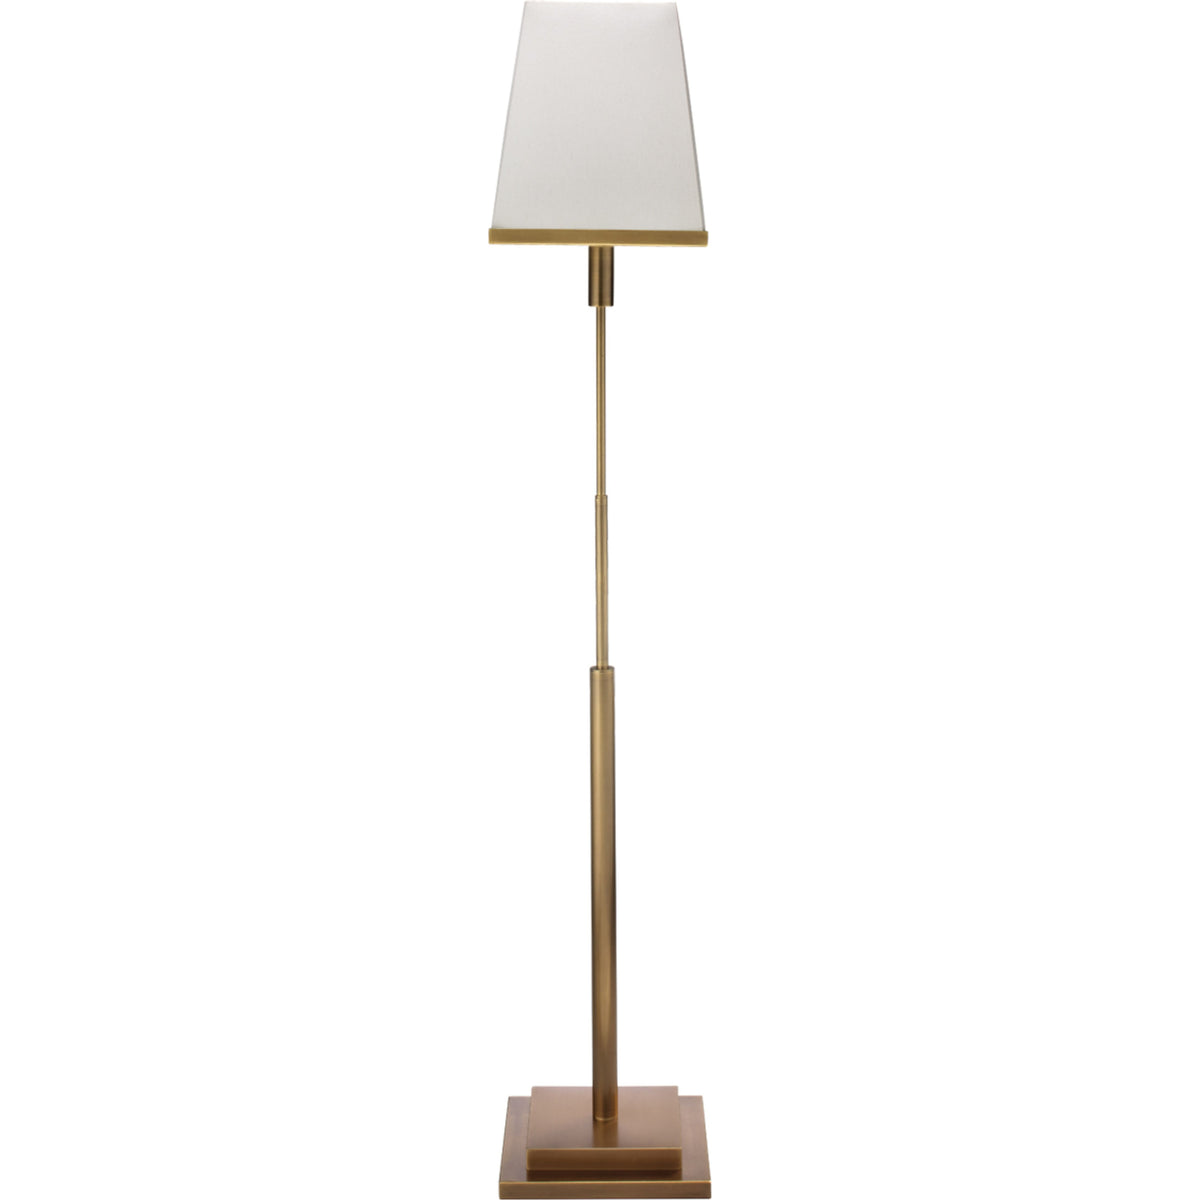 Jamie Young Company - 1JUD-FLAB - Jud Floor Lamp -  - Antique Brass